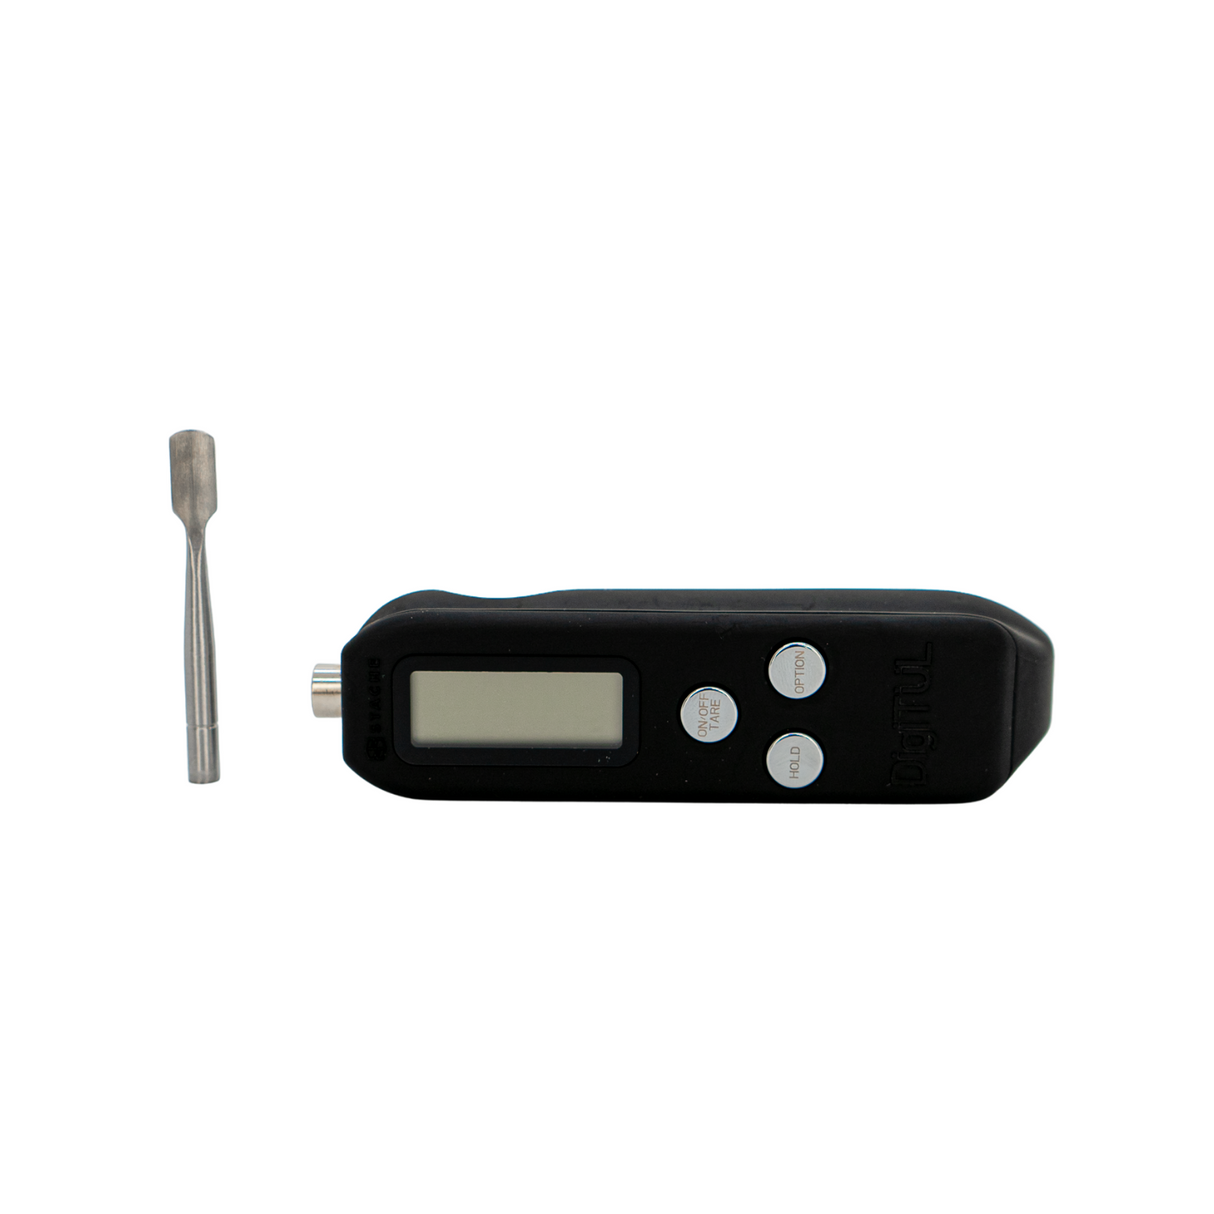 Stacheproducts DigiTül - Portable Digital Tool with LCD Screen - Front View